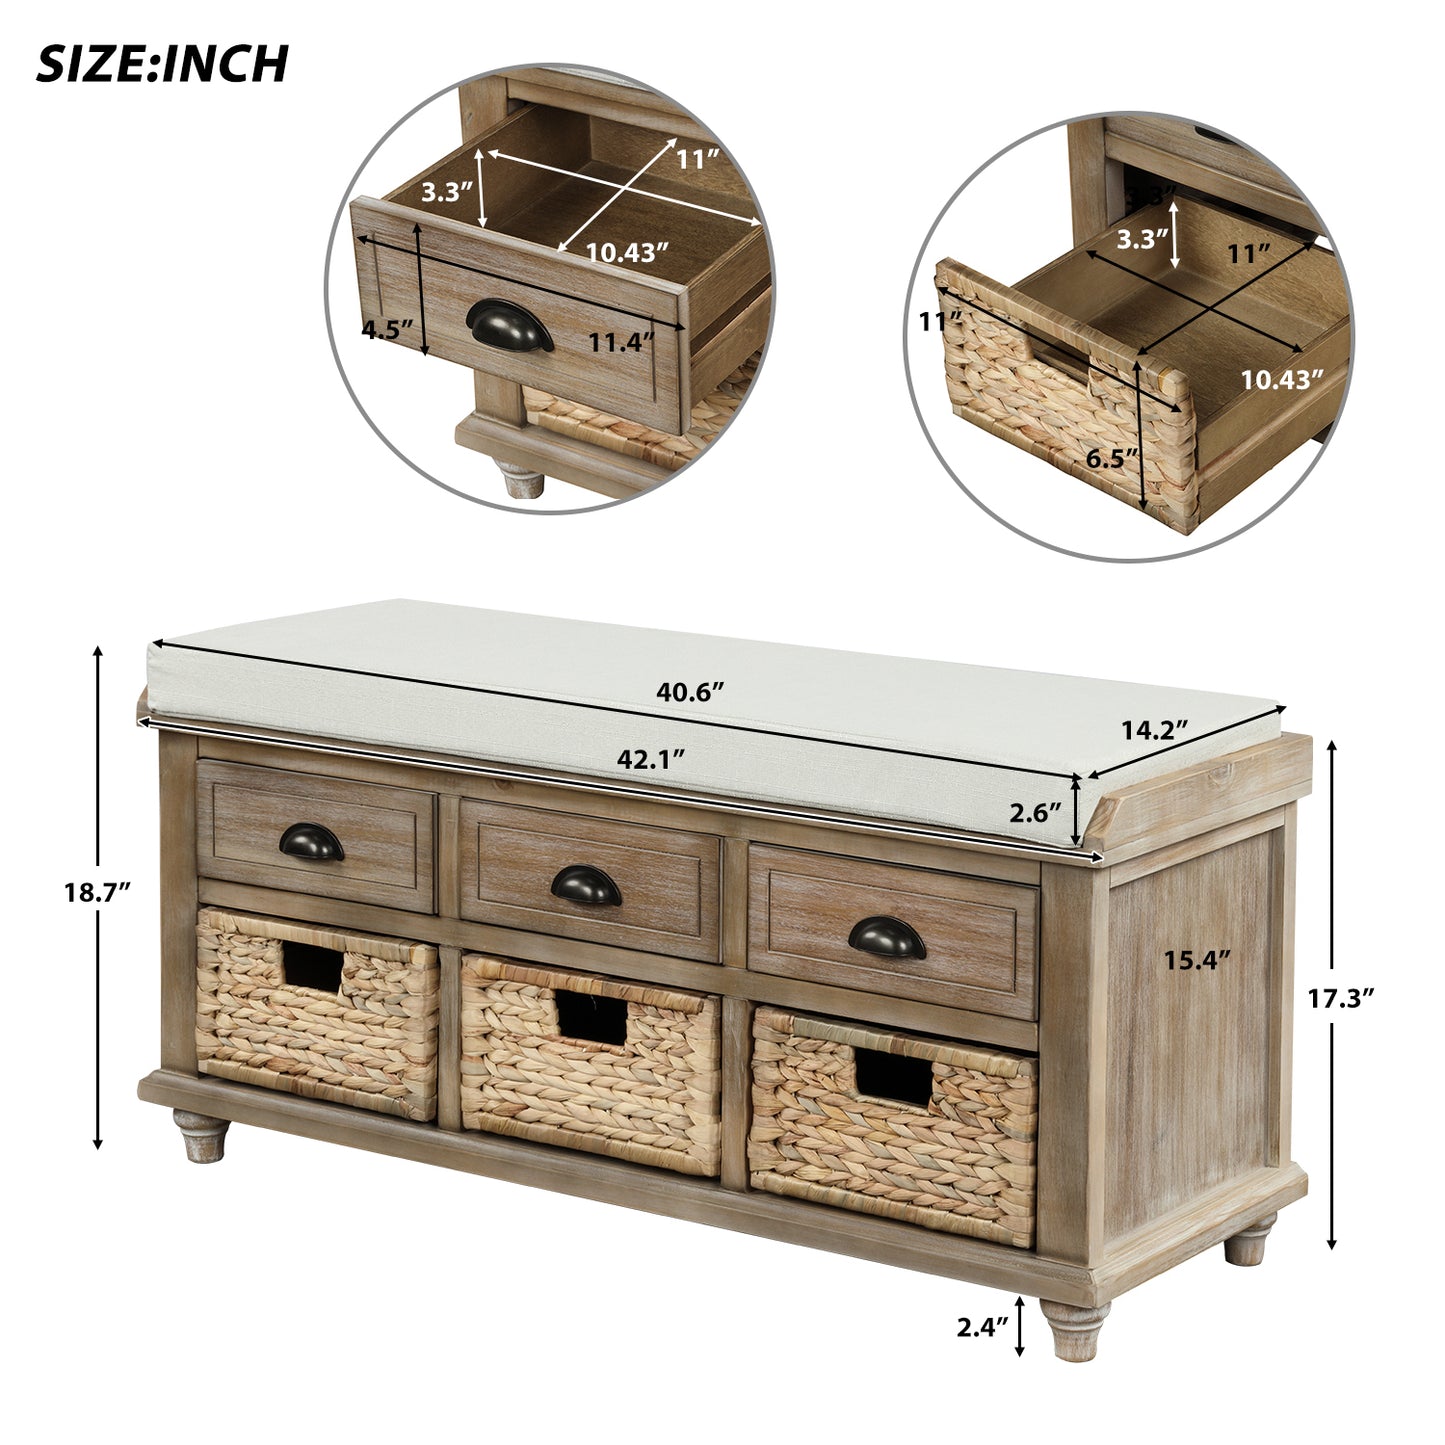 TREXM Rustic Storage Bench with 3 Drawers and 3 Rattan Baskets - White Wash